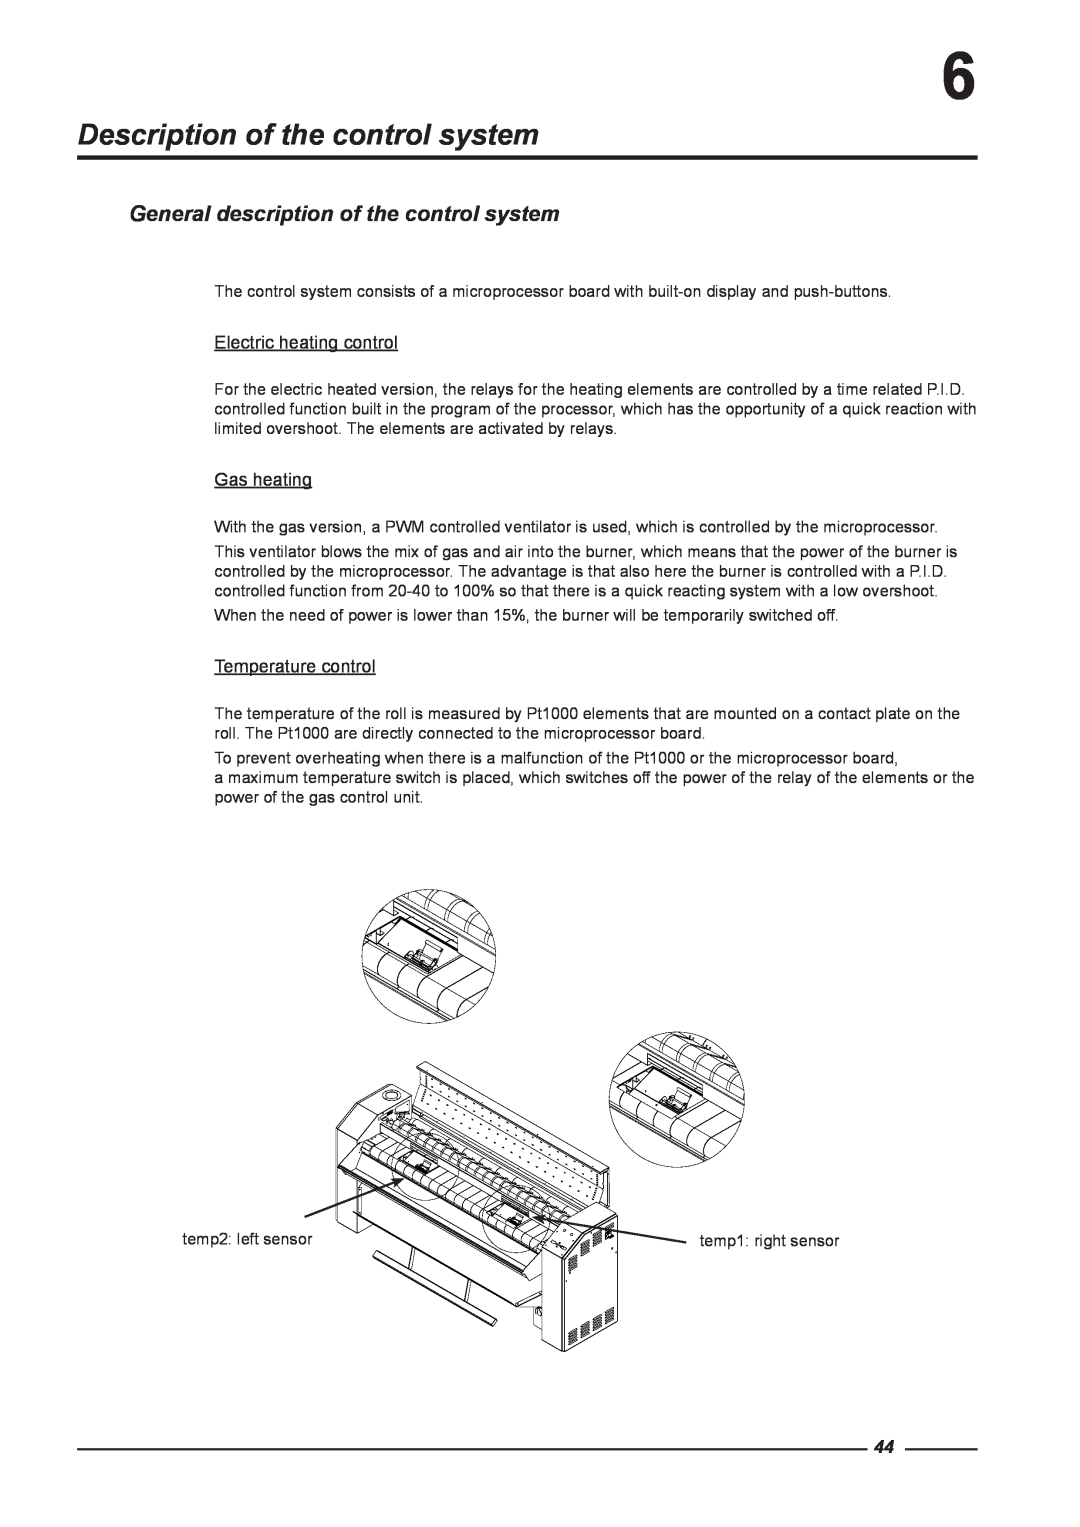 Alliance Laundry Systems CI 1650/325 Description of the control system, General description of the control system 